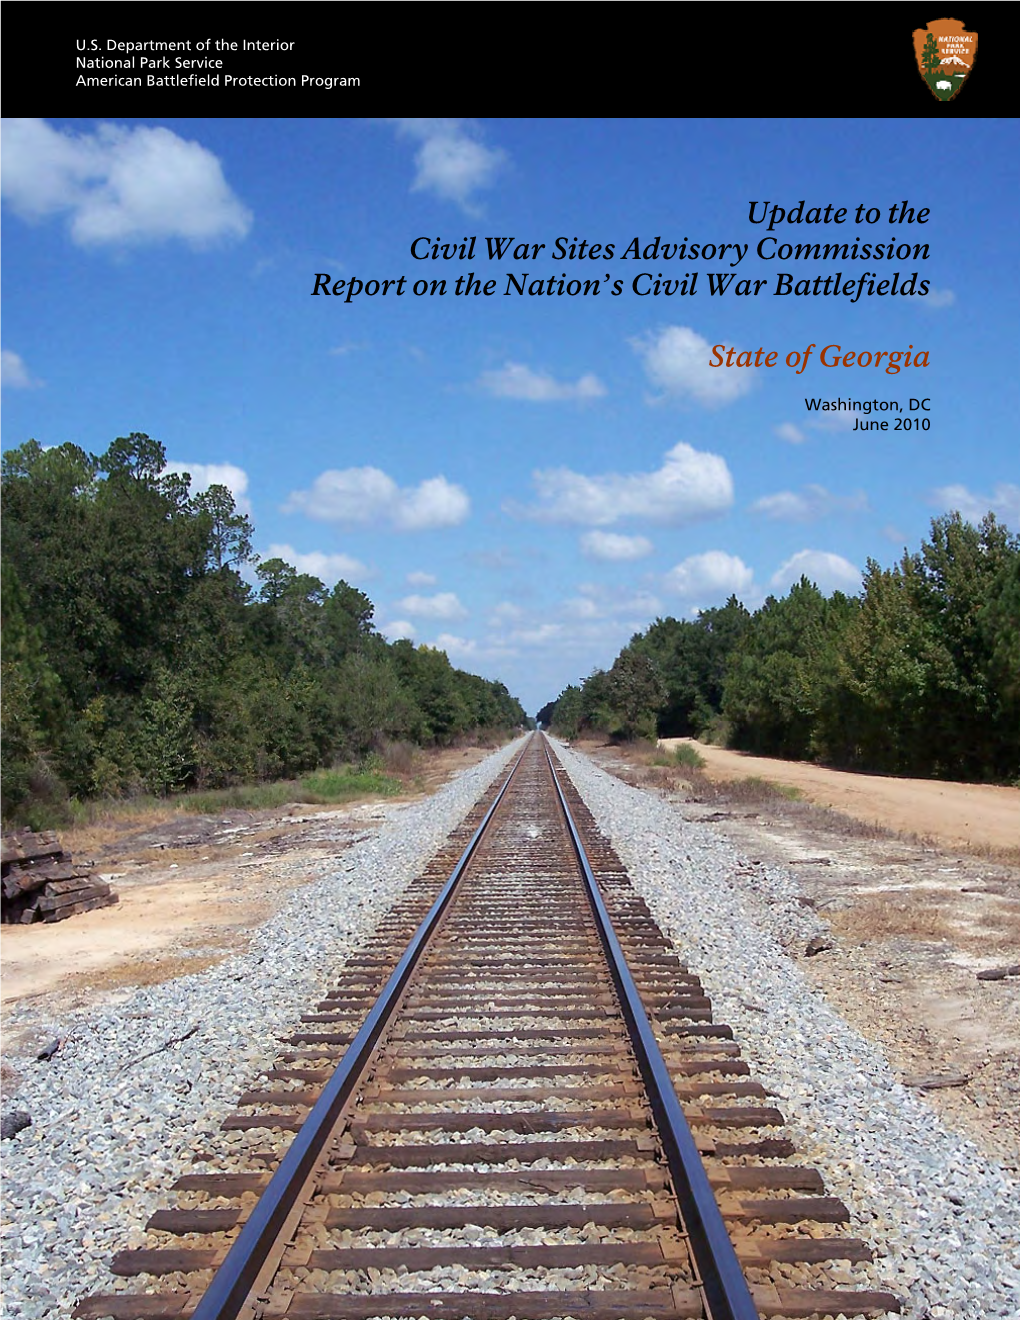 Update to the Civil War Sites Advisory Commission Report on the Nation’S Civil War Battlefields